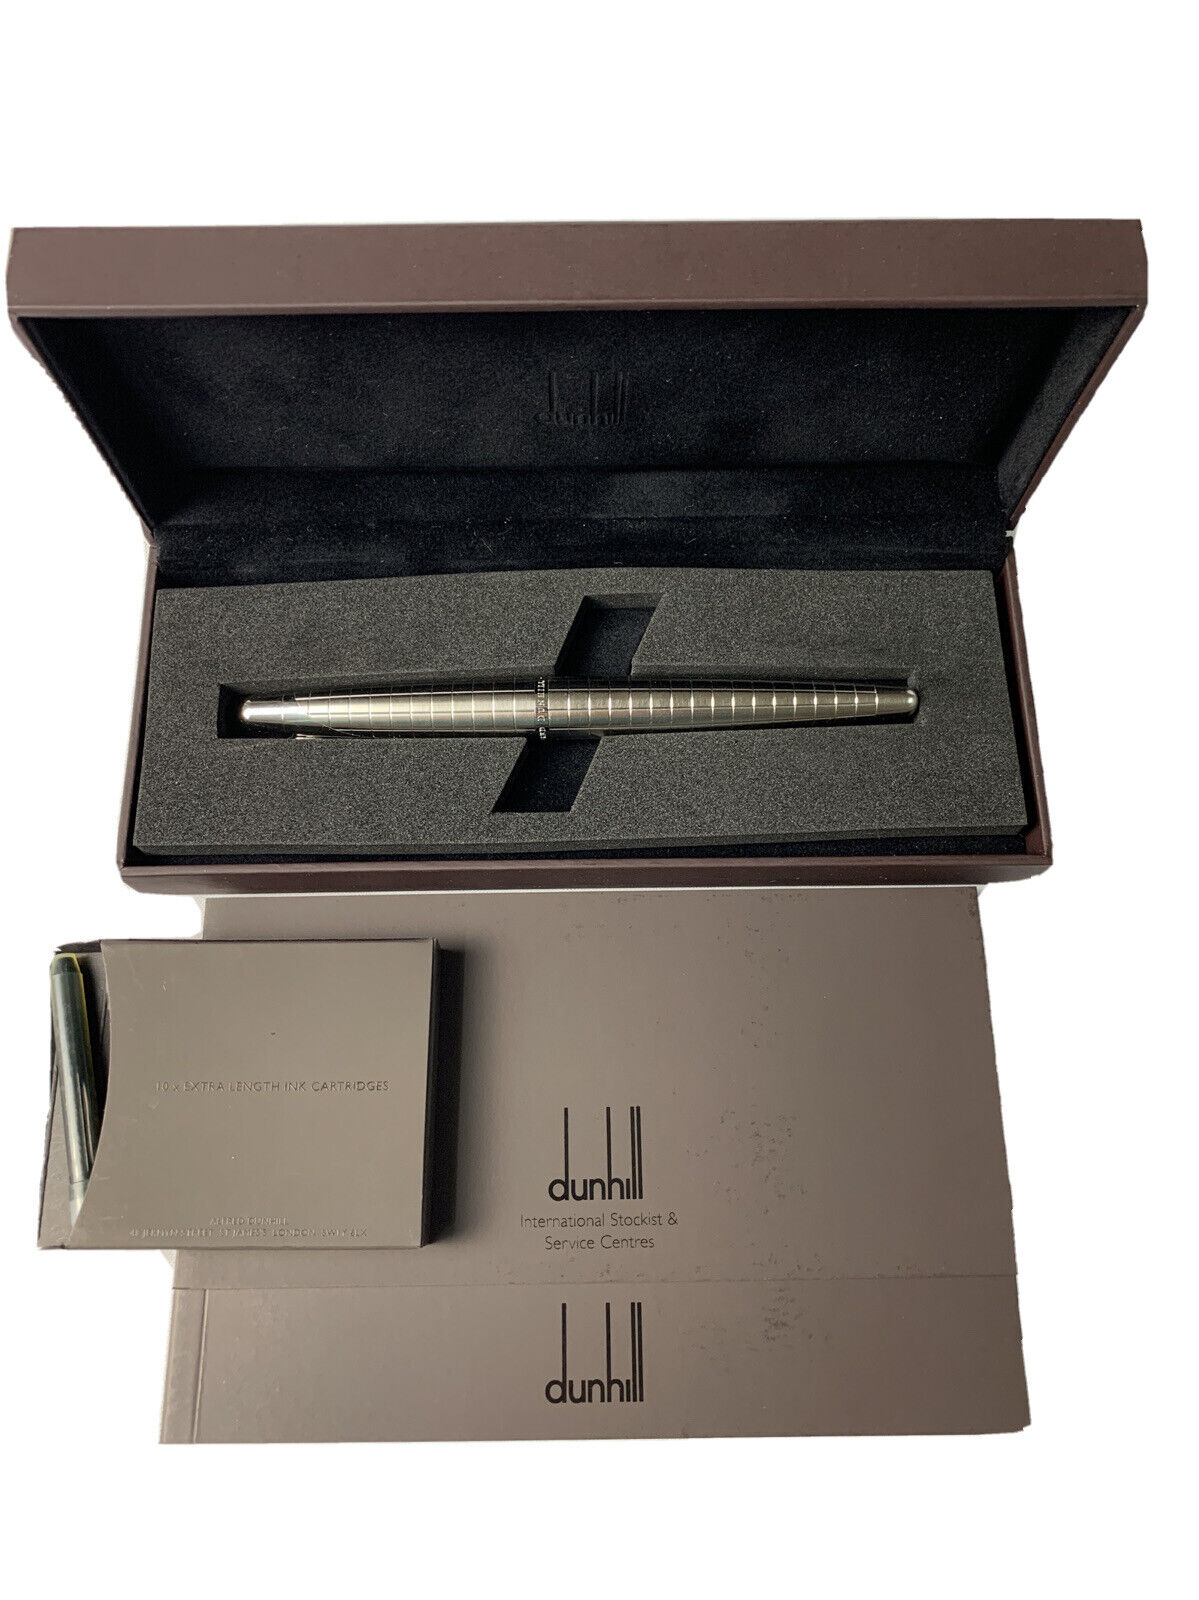 Dunhill AD2000 Brushed Stainless Steel Fountain Pen 18K Torpedo Shape EXTRAS NIB